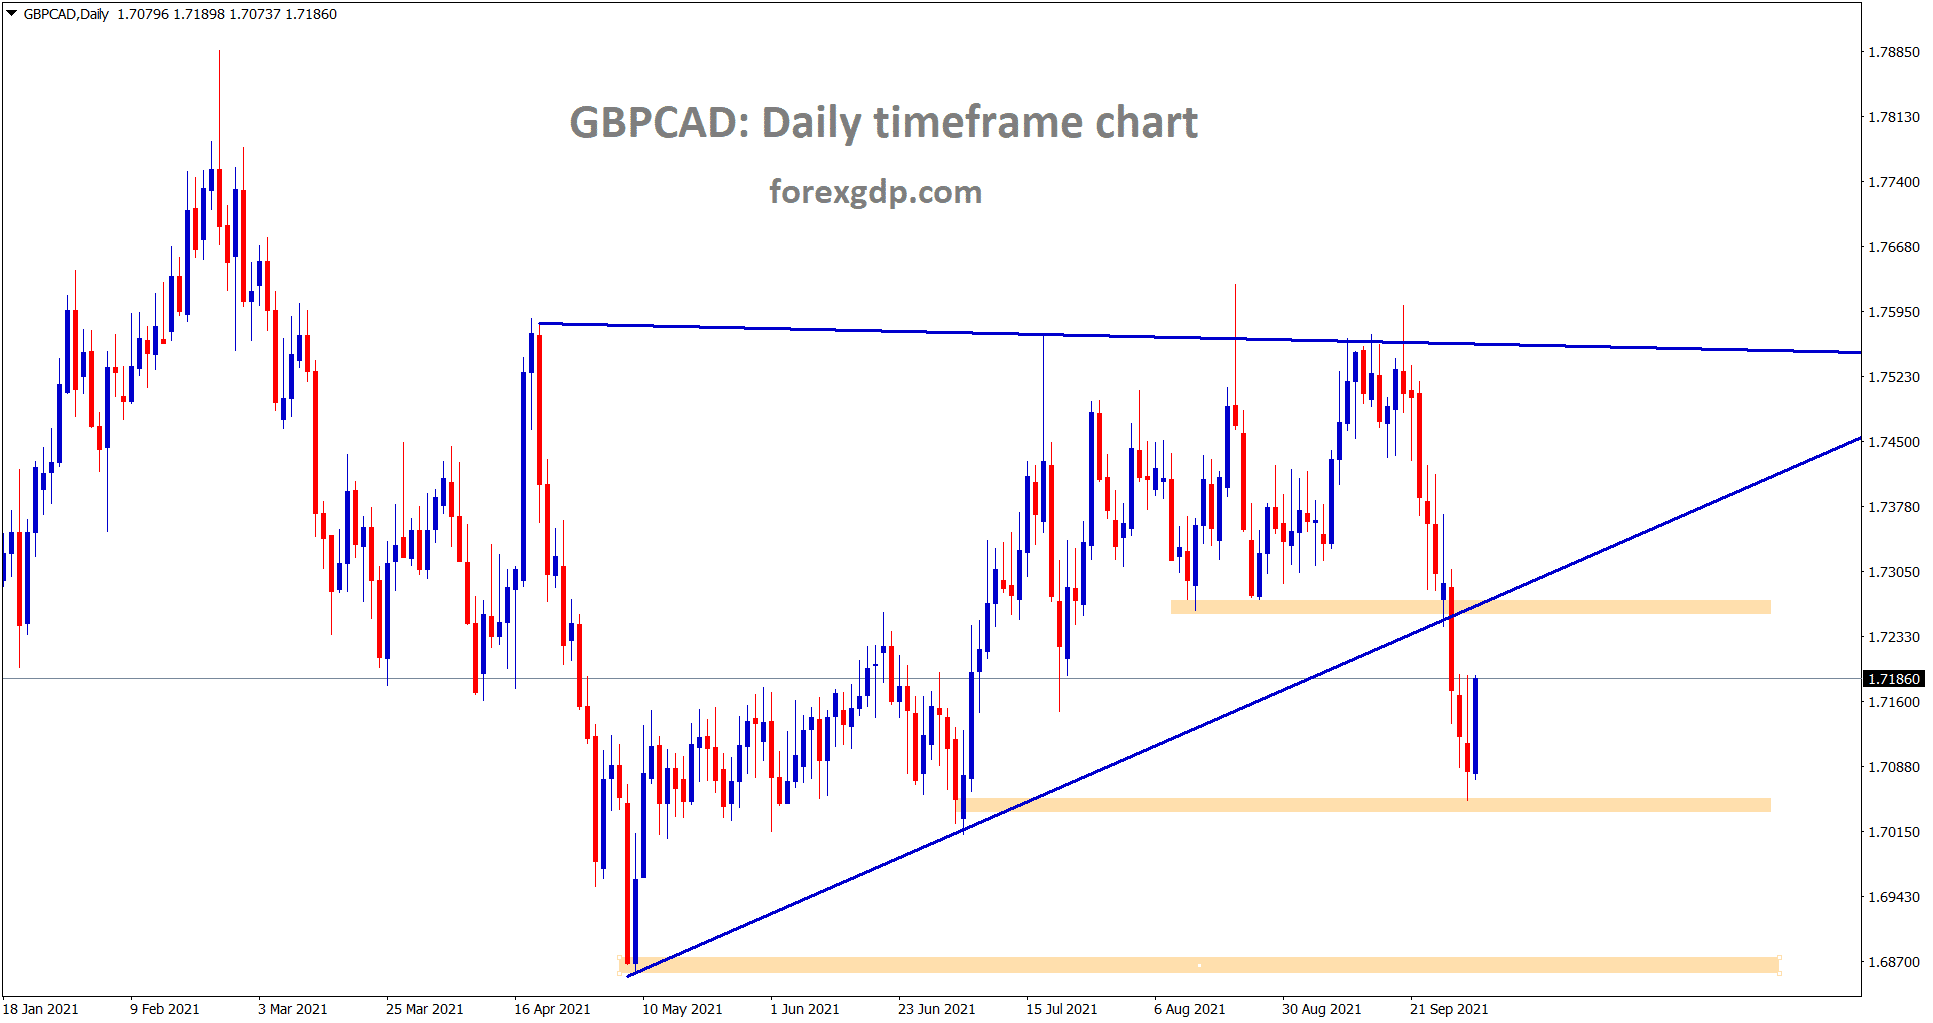 GBPCAD has rebounded from the horizontal support area trying to retest the recently broken support again.